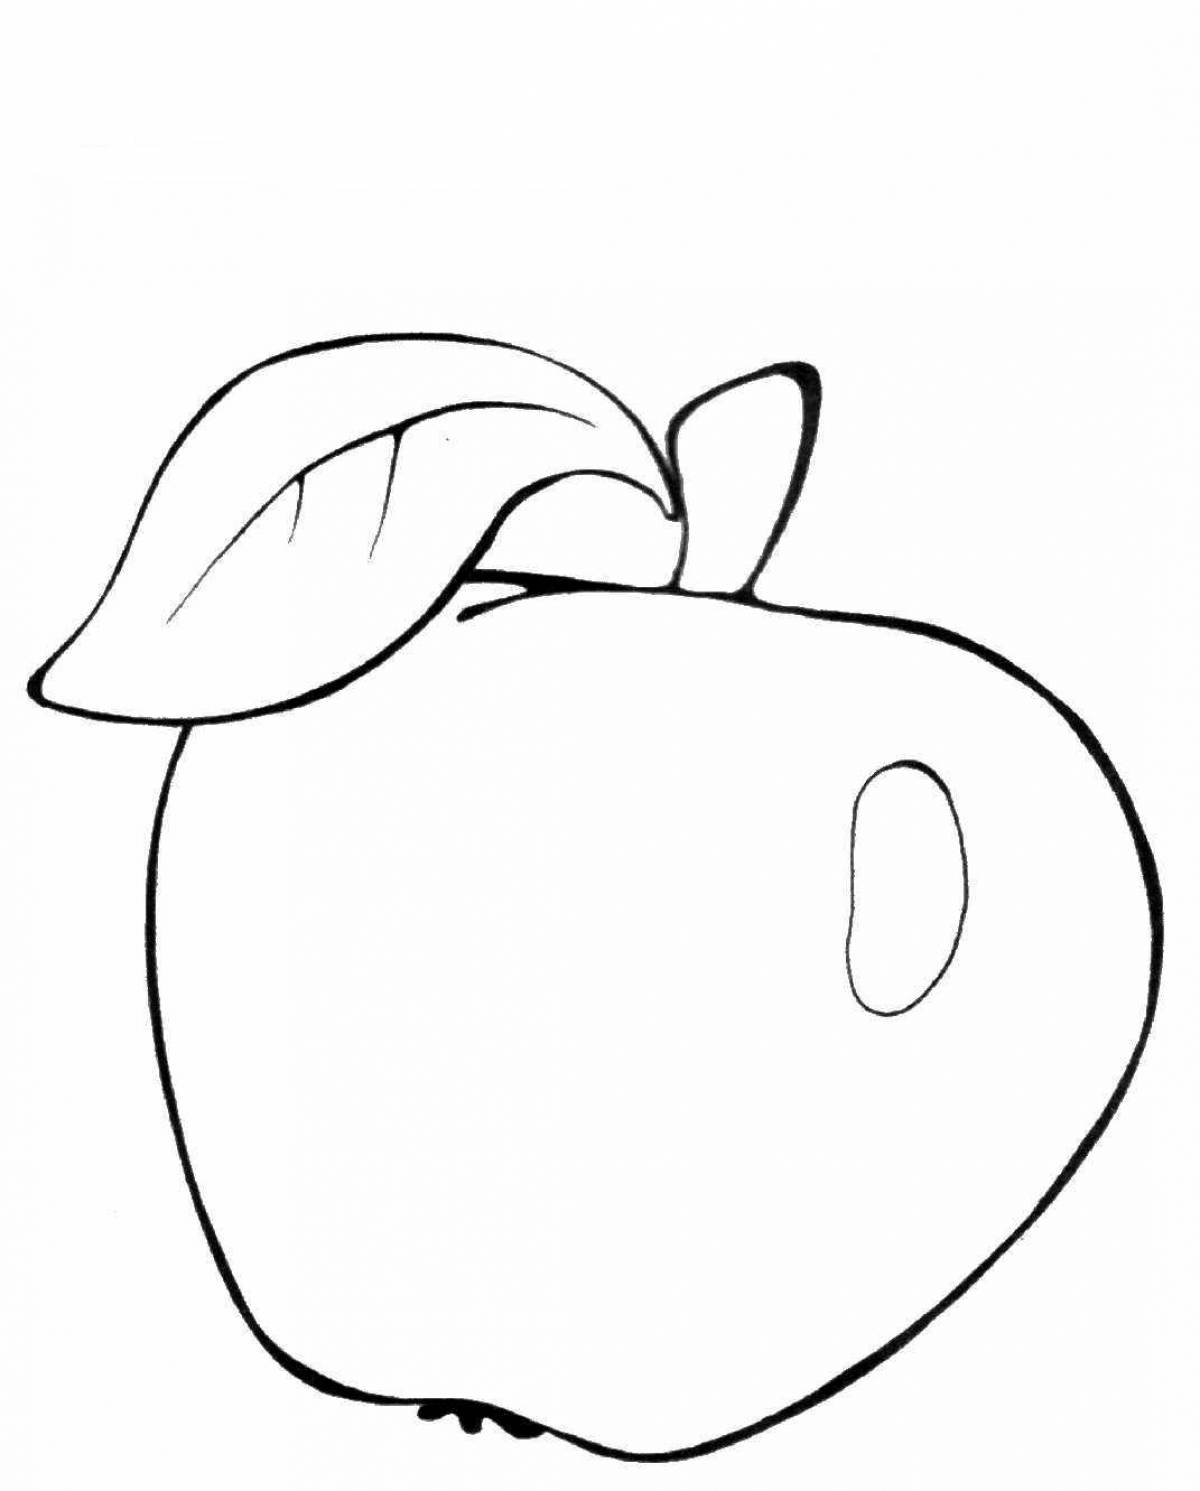 Coloring apple